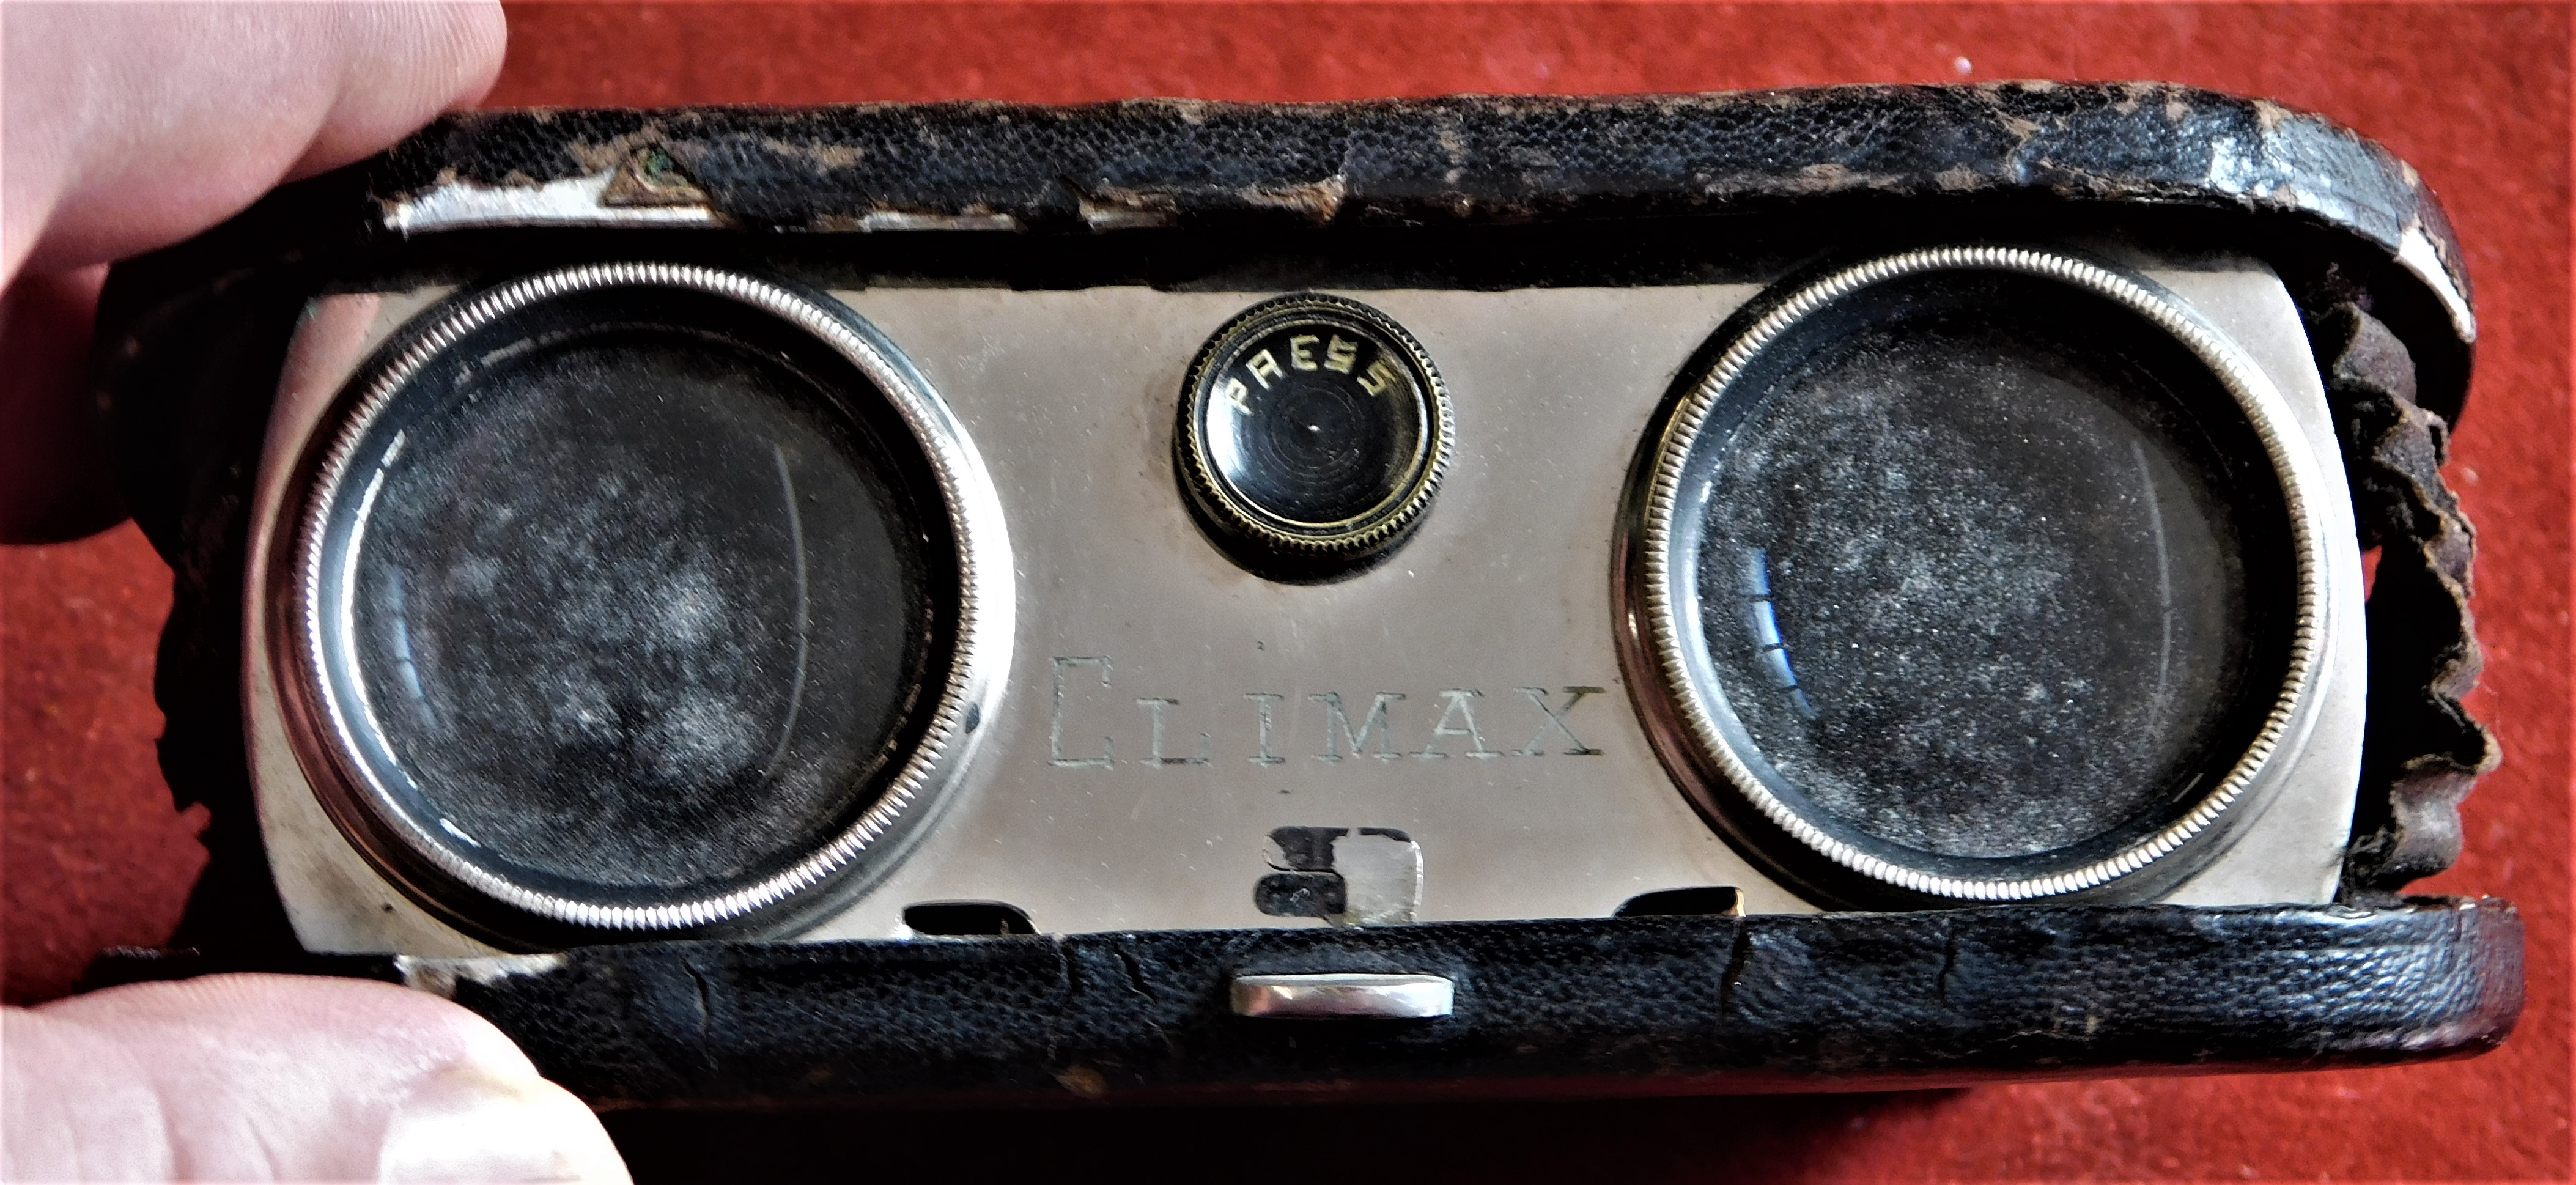 Glasses - Leather Bound Opera Glasses-folding (Name Climax) date early 1920's worn leather inside on - Image 2 of 2